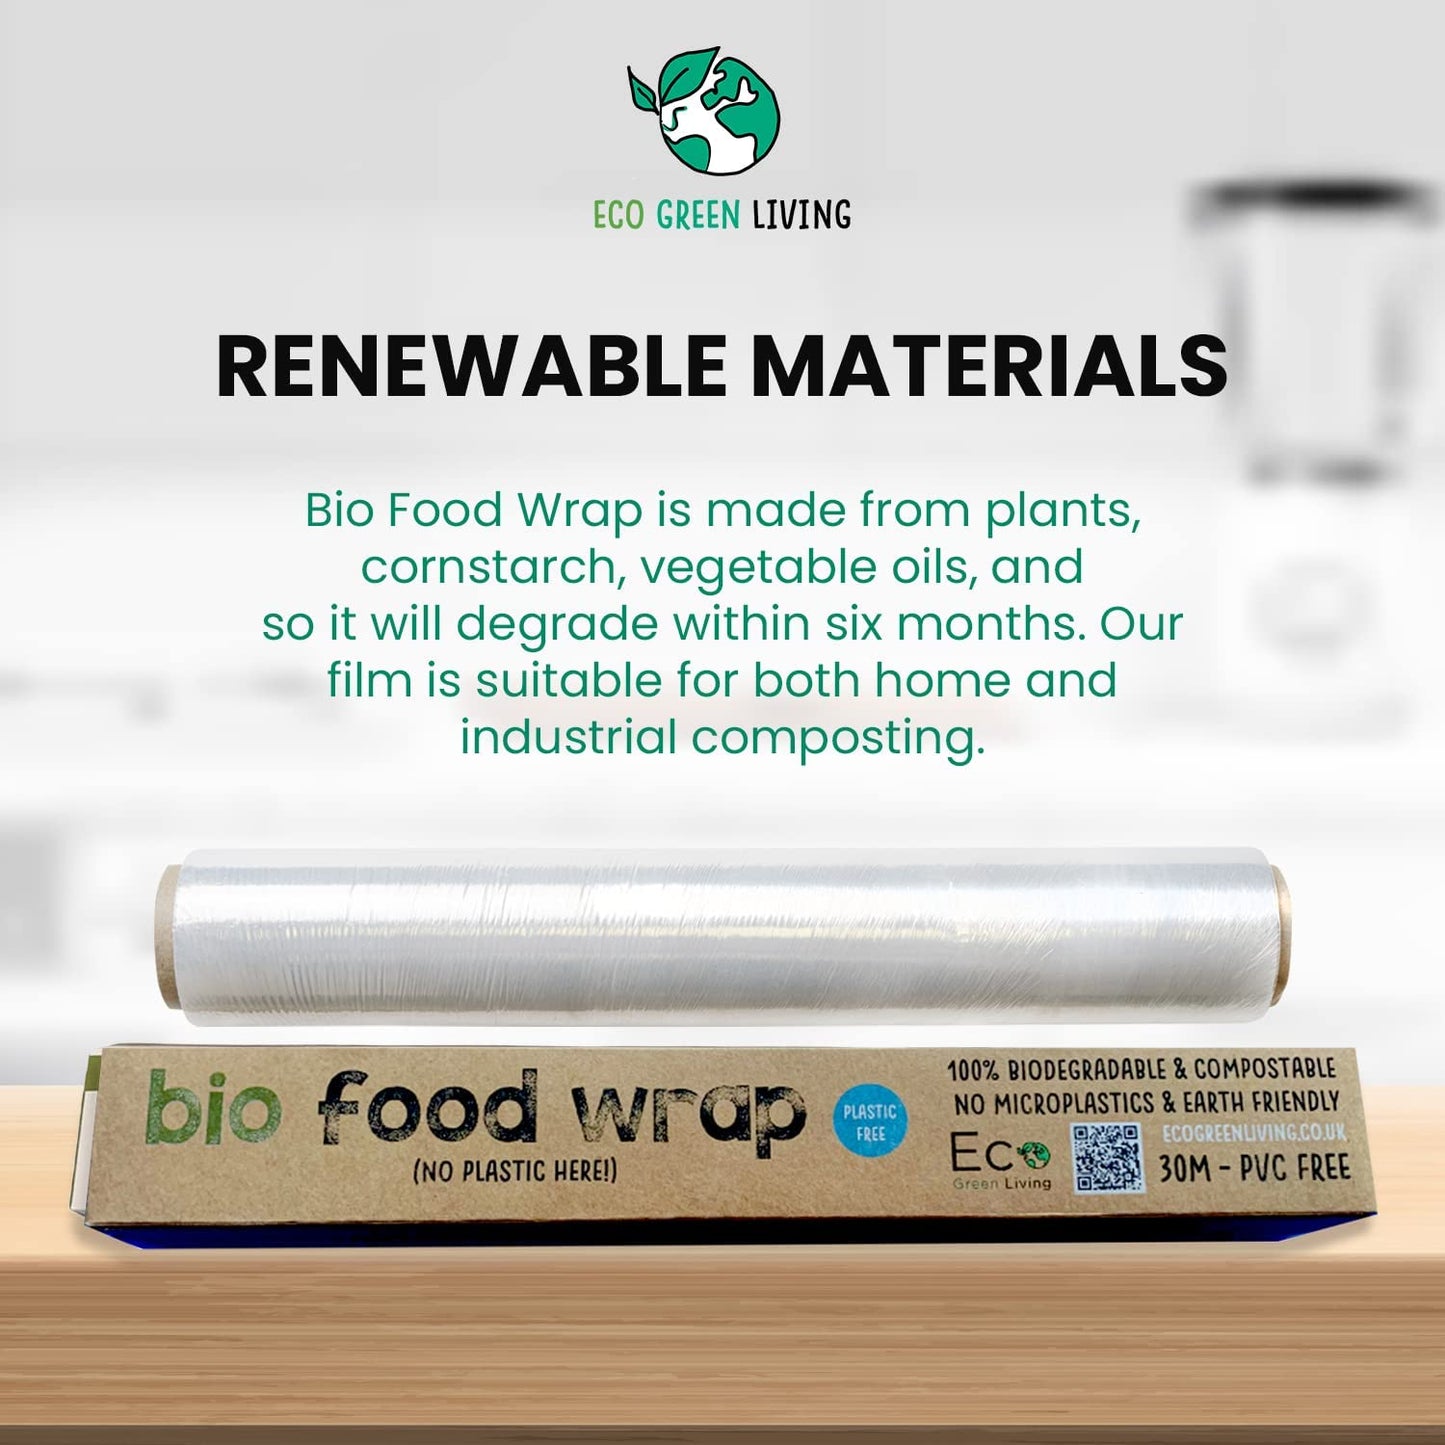 Compostable Cling Film Without The Plastic - Recycled Packaging - 1 roll 30cm x 30m - Eco Green Living